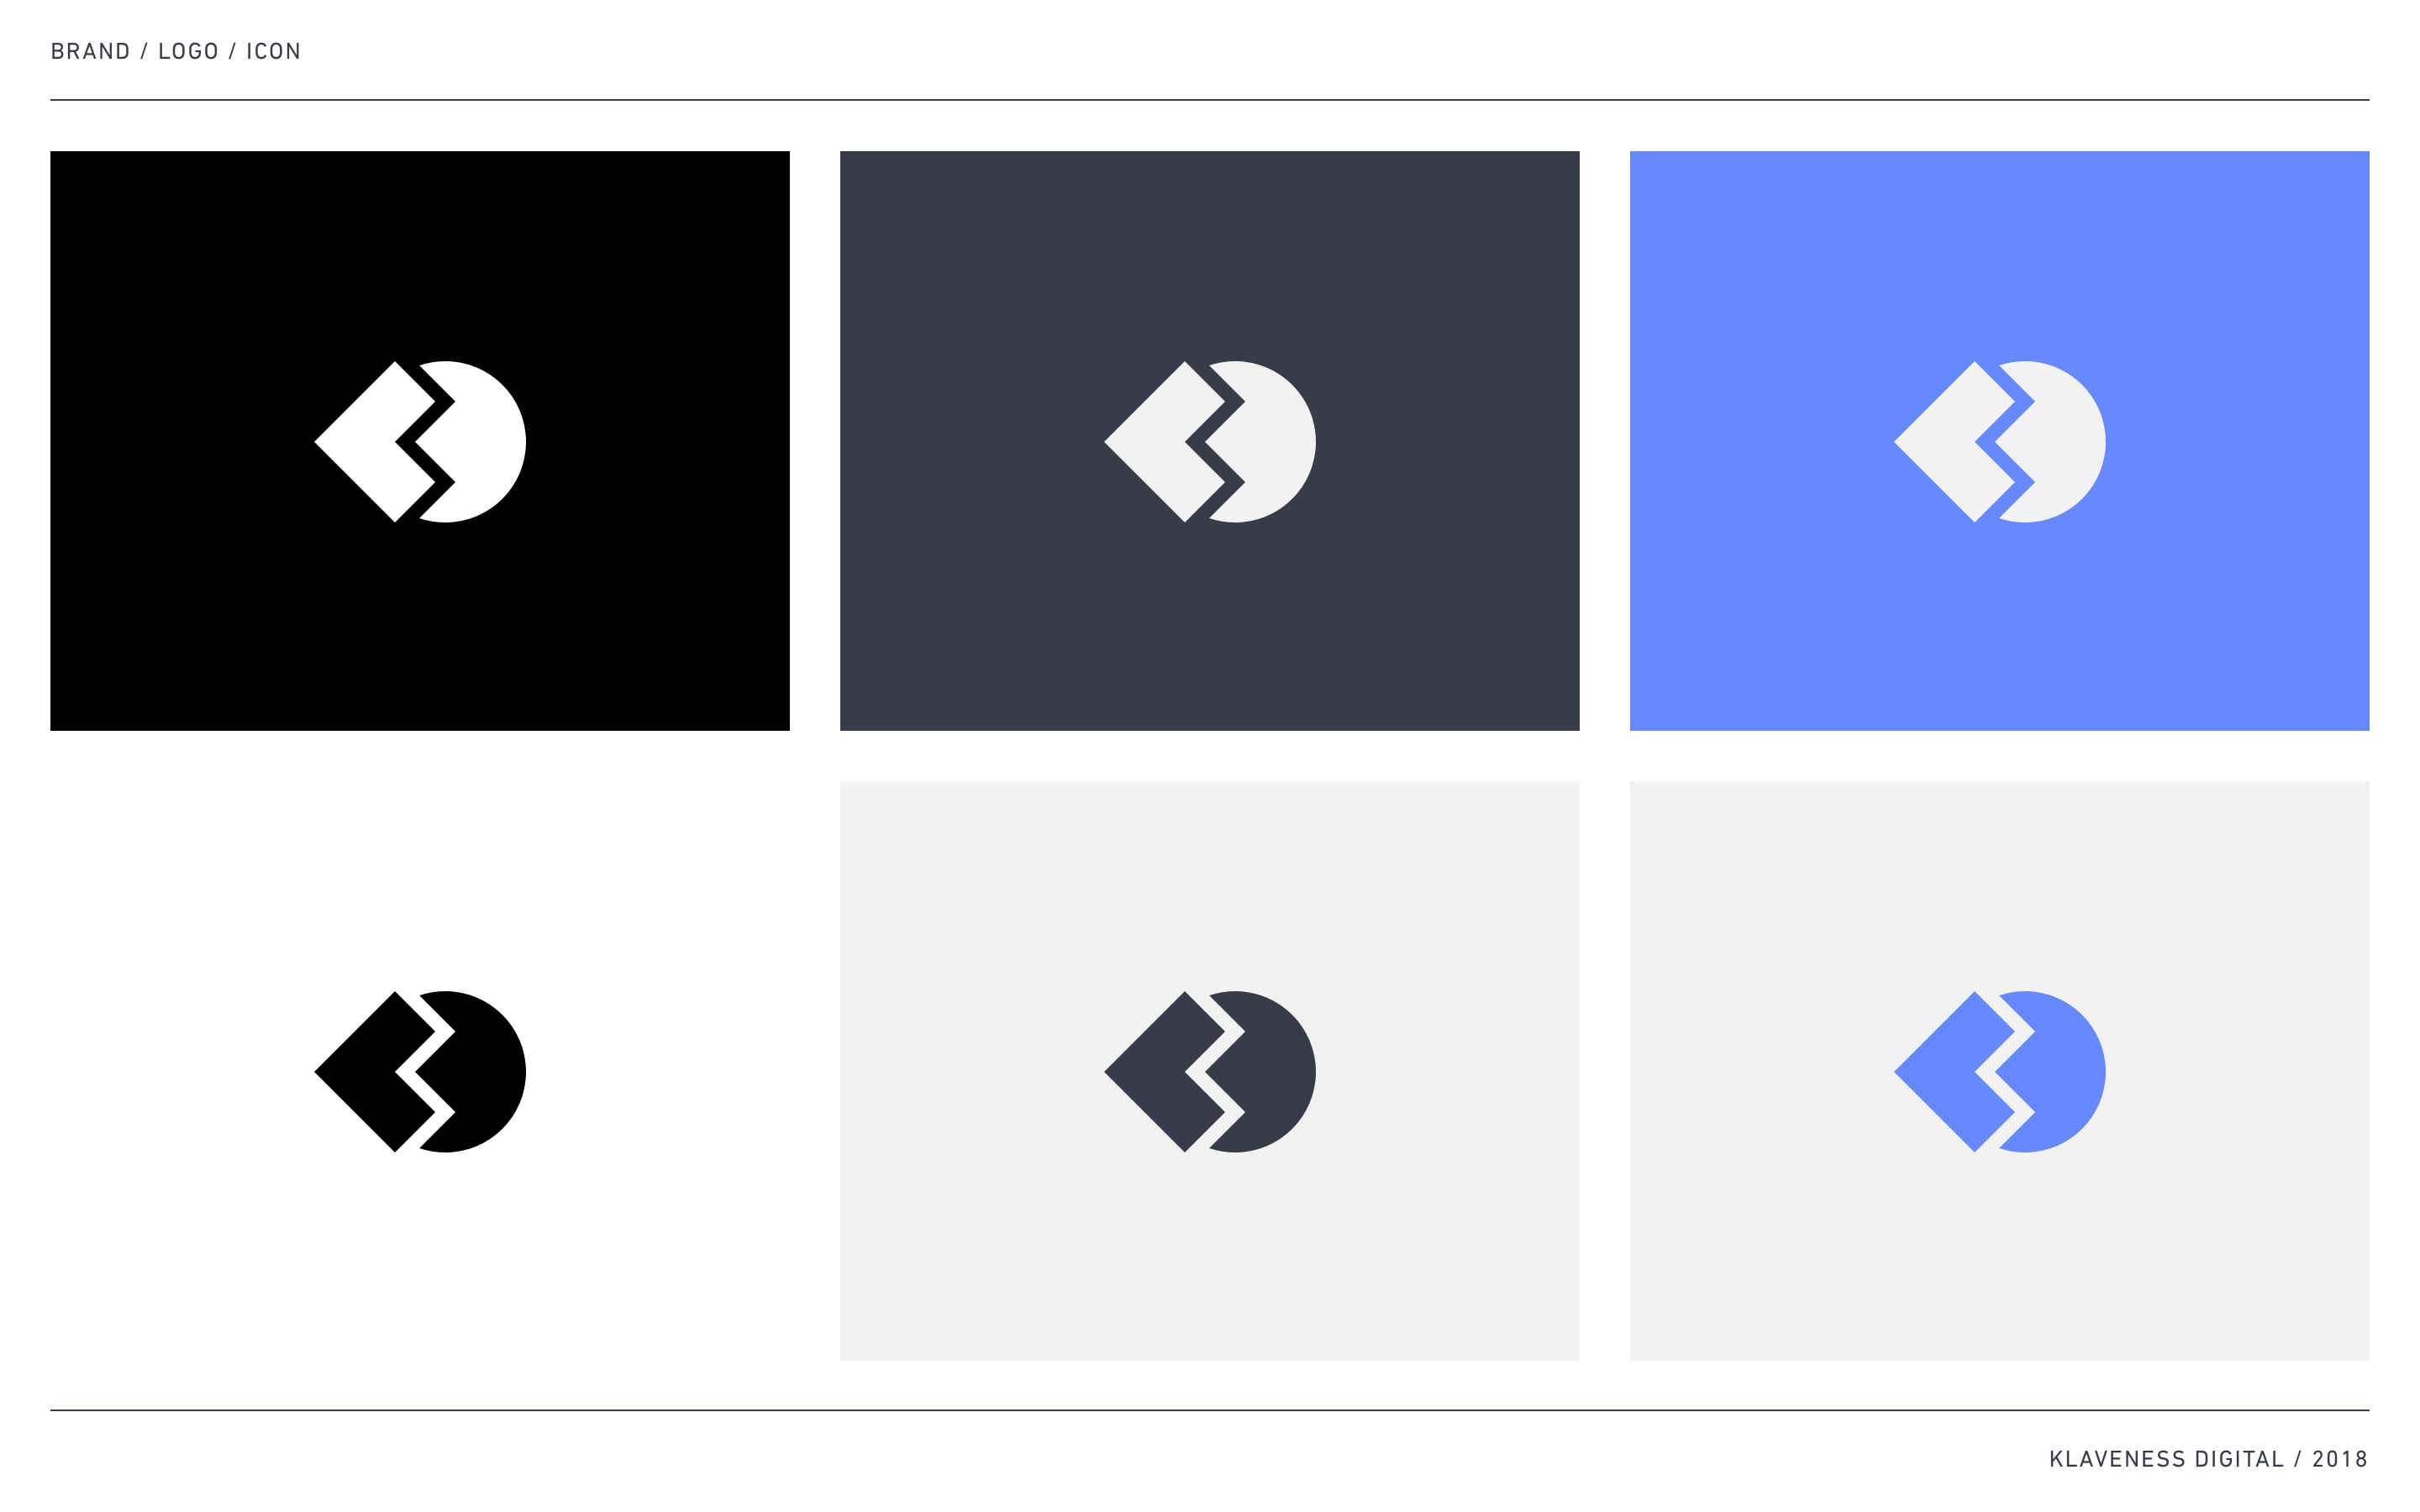 The icon in black and white and color combos